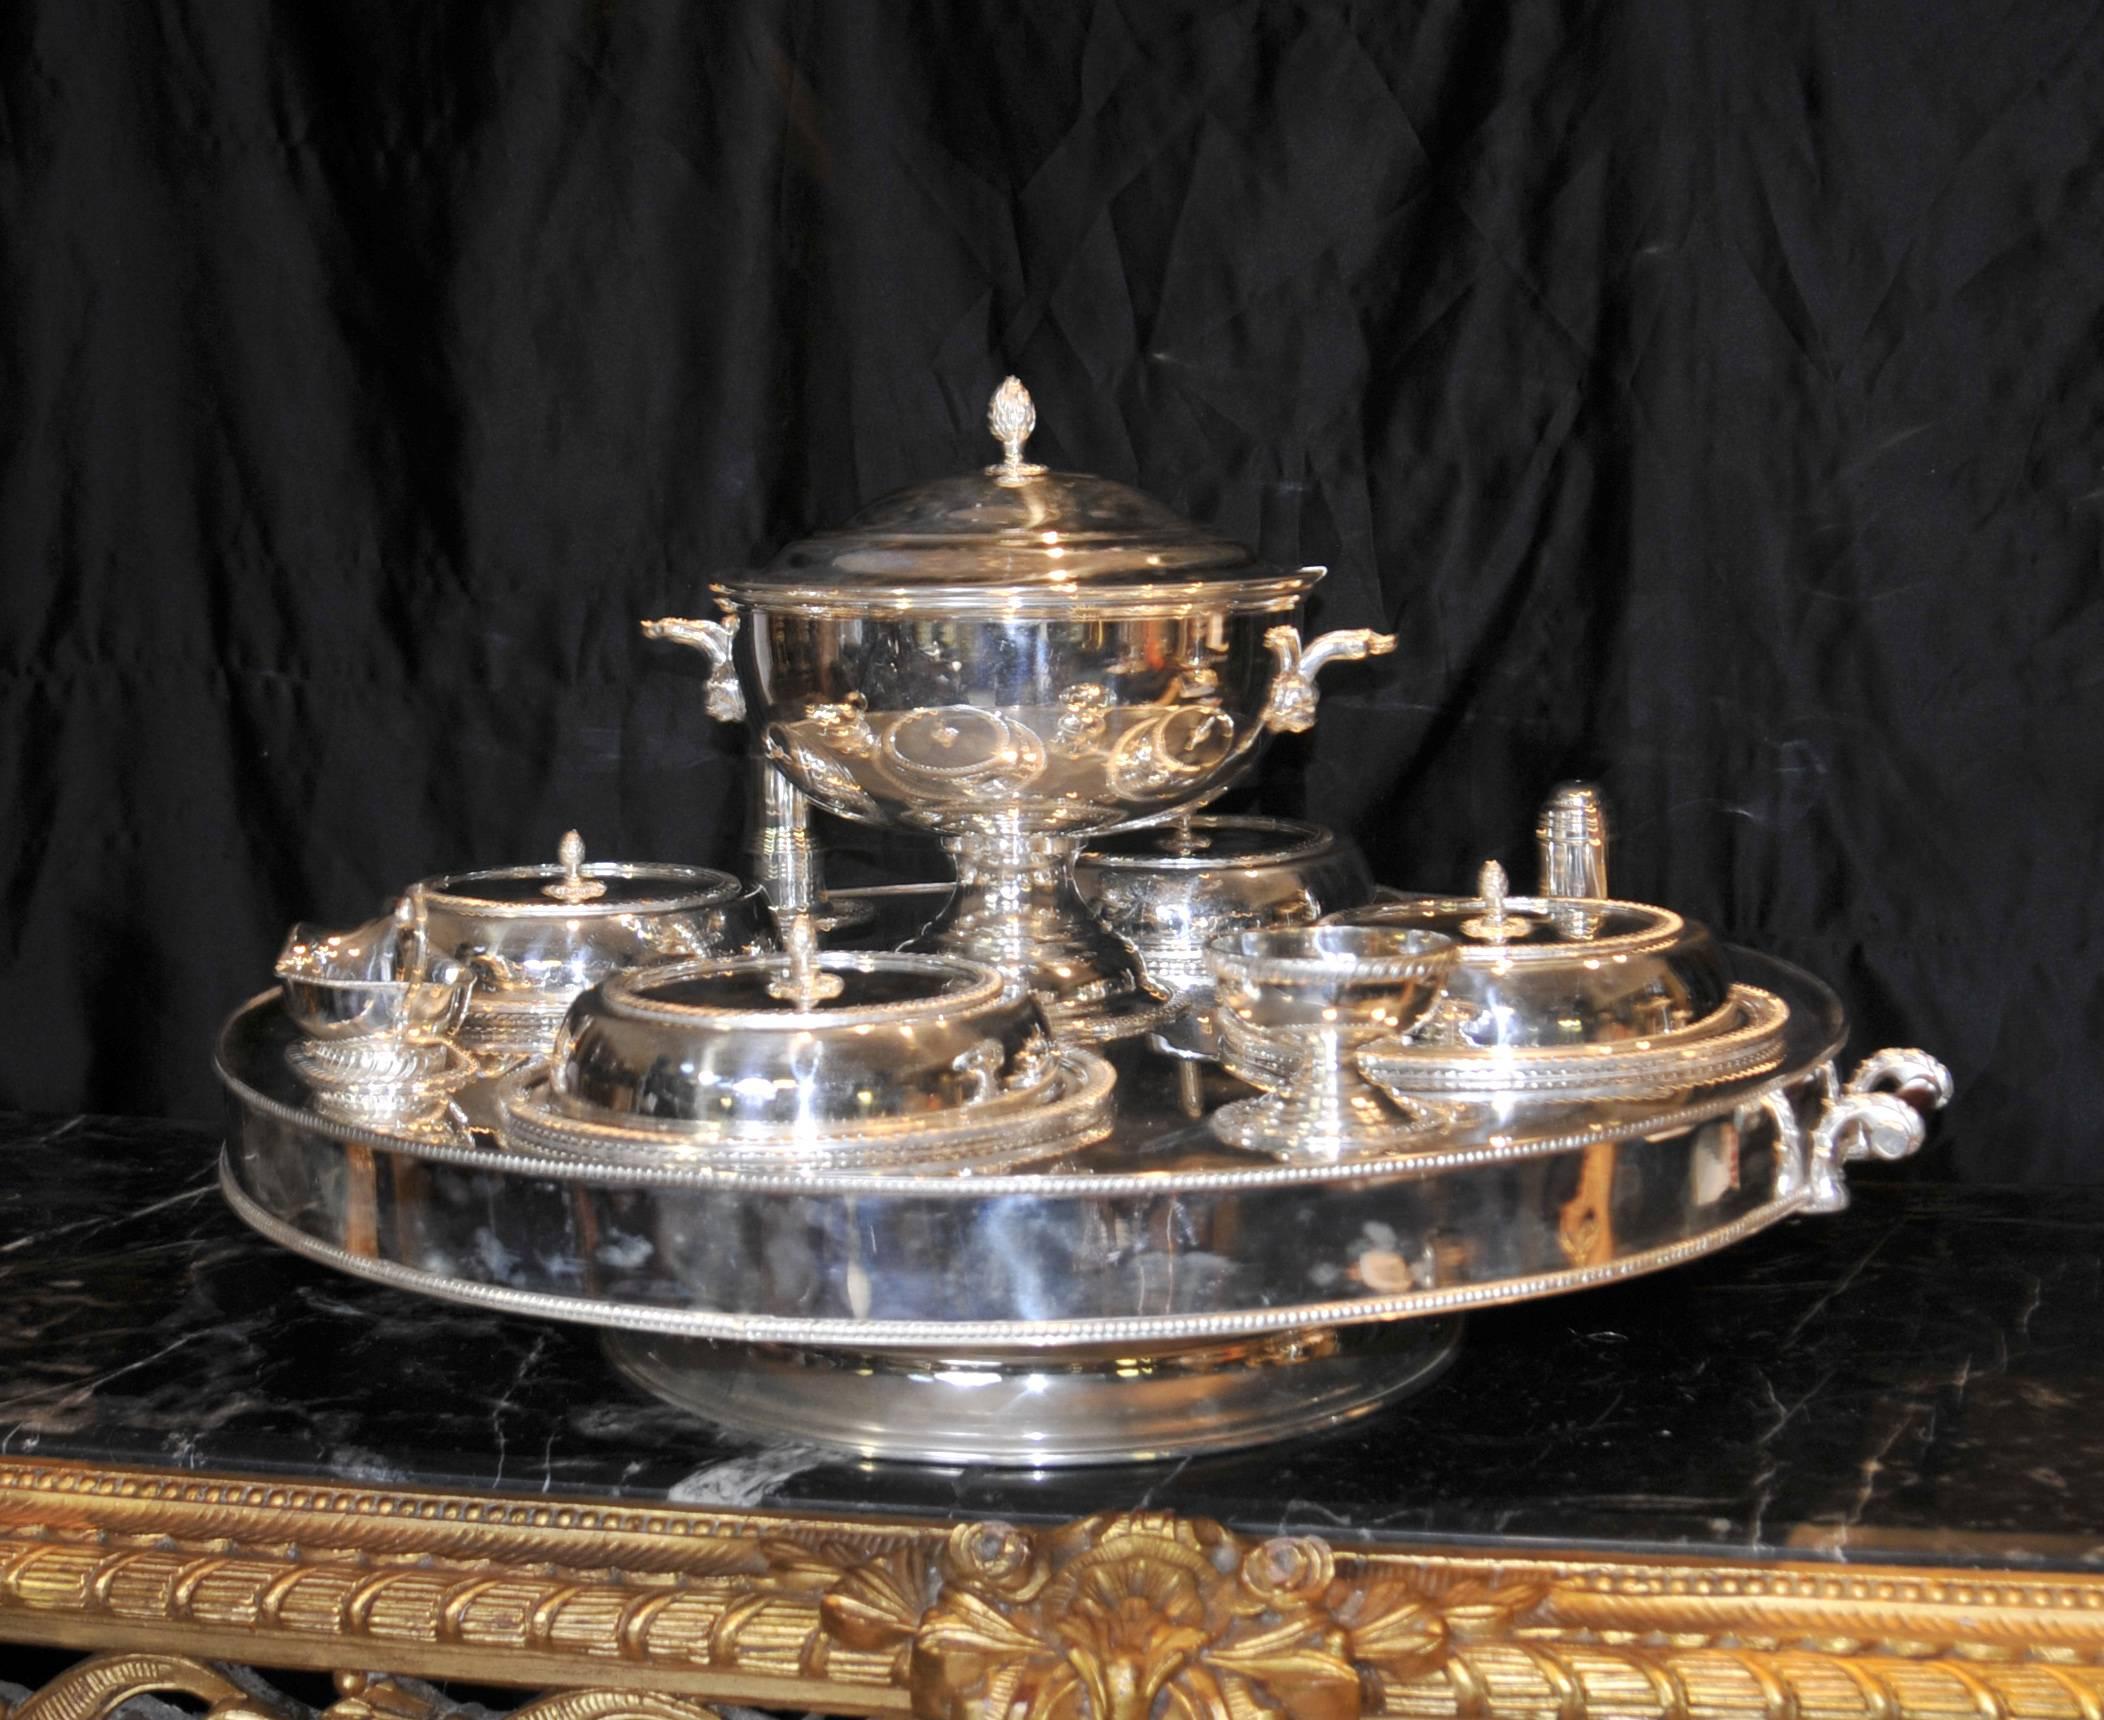 Gorgeous English Sheffield silver plate lazy susan - or dumb waiter server.
Piece serves numerous functions as a hot plate to keep food warm and the whole things revolves for ease of serving.
The food would be heated by having hot water inside the